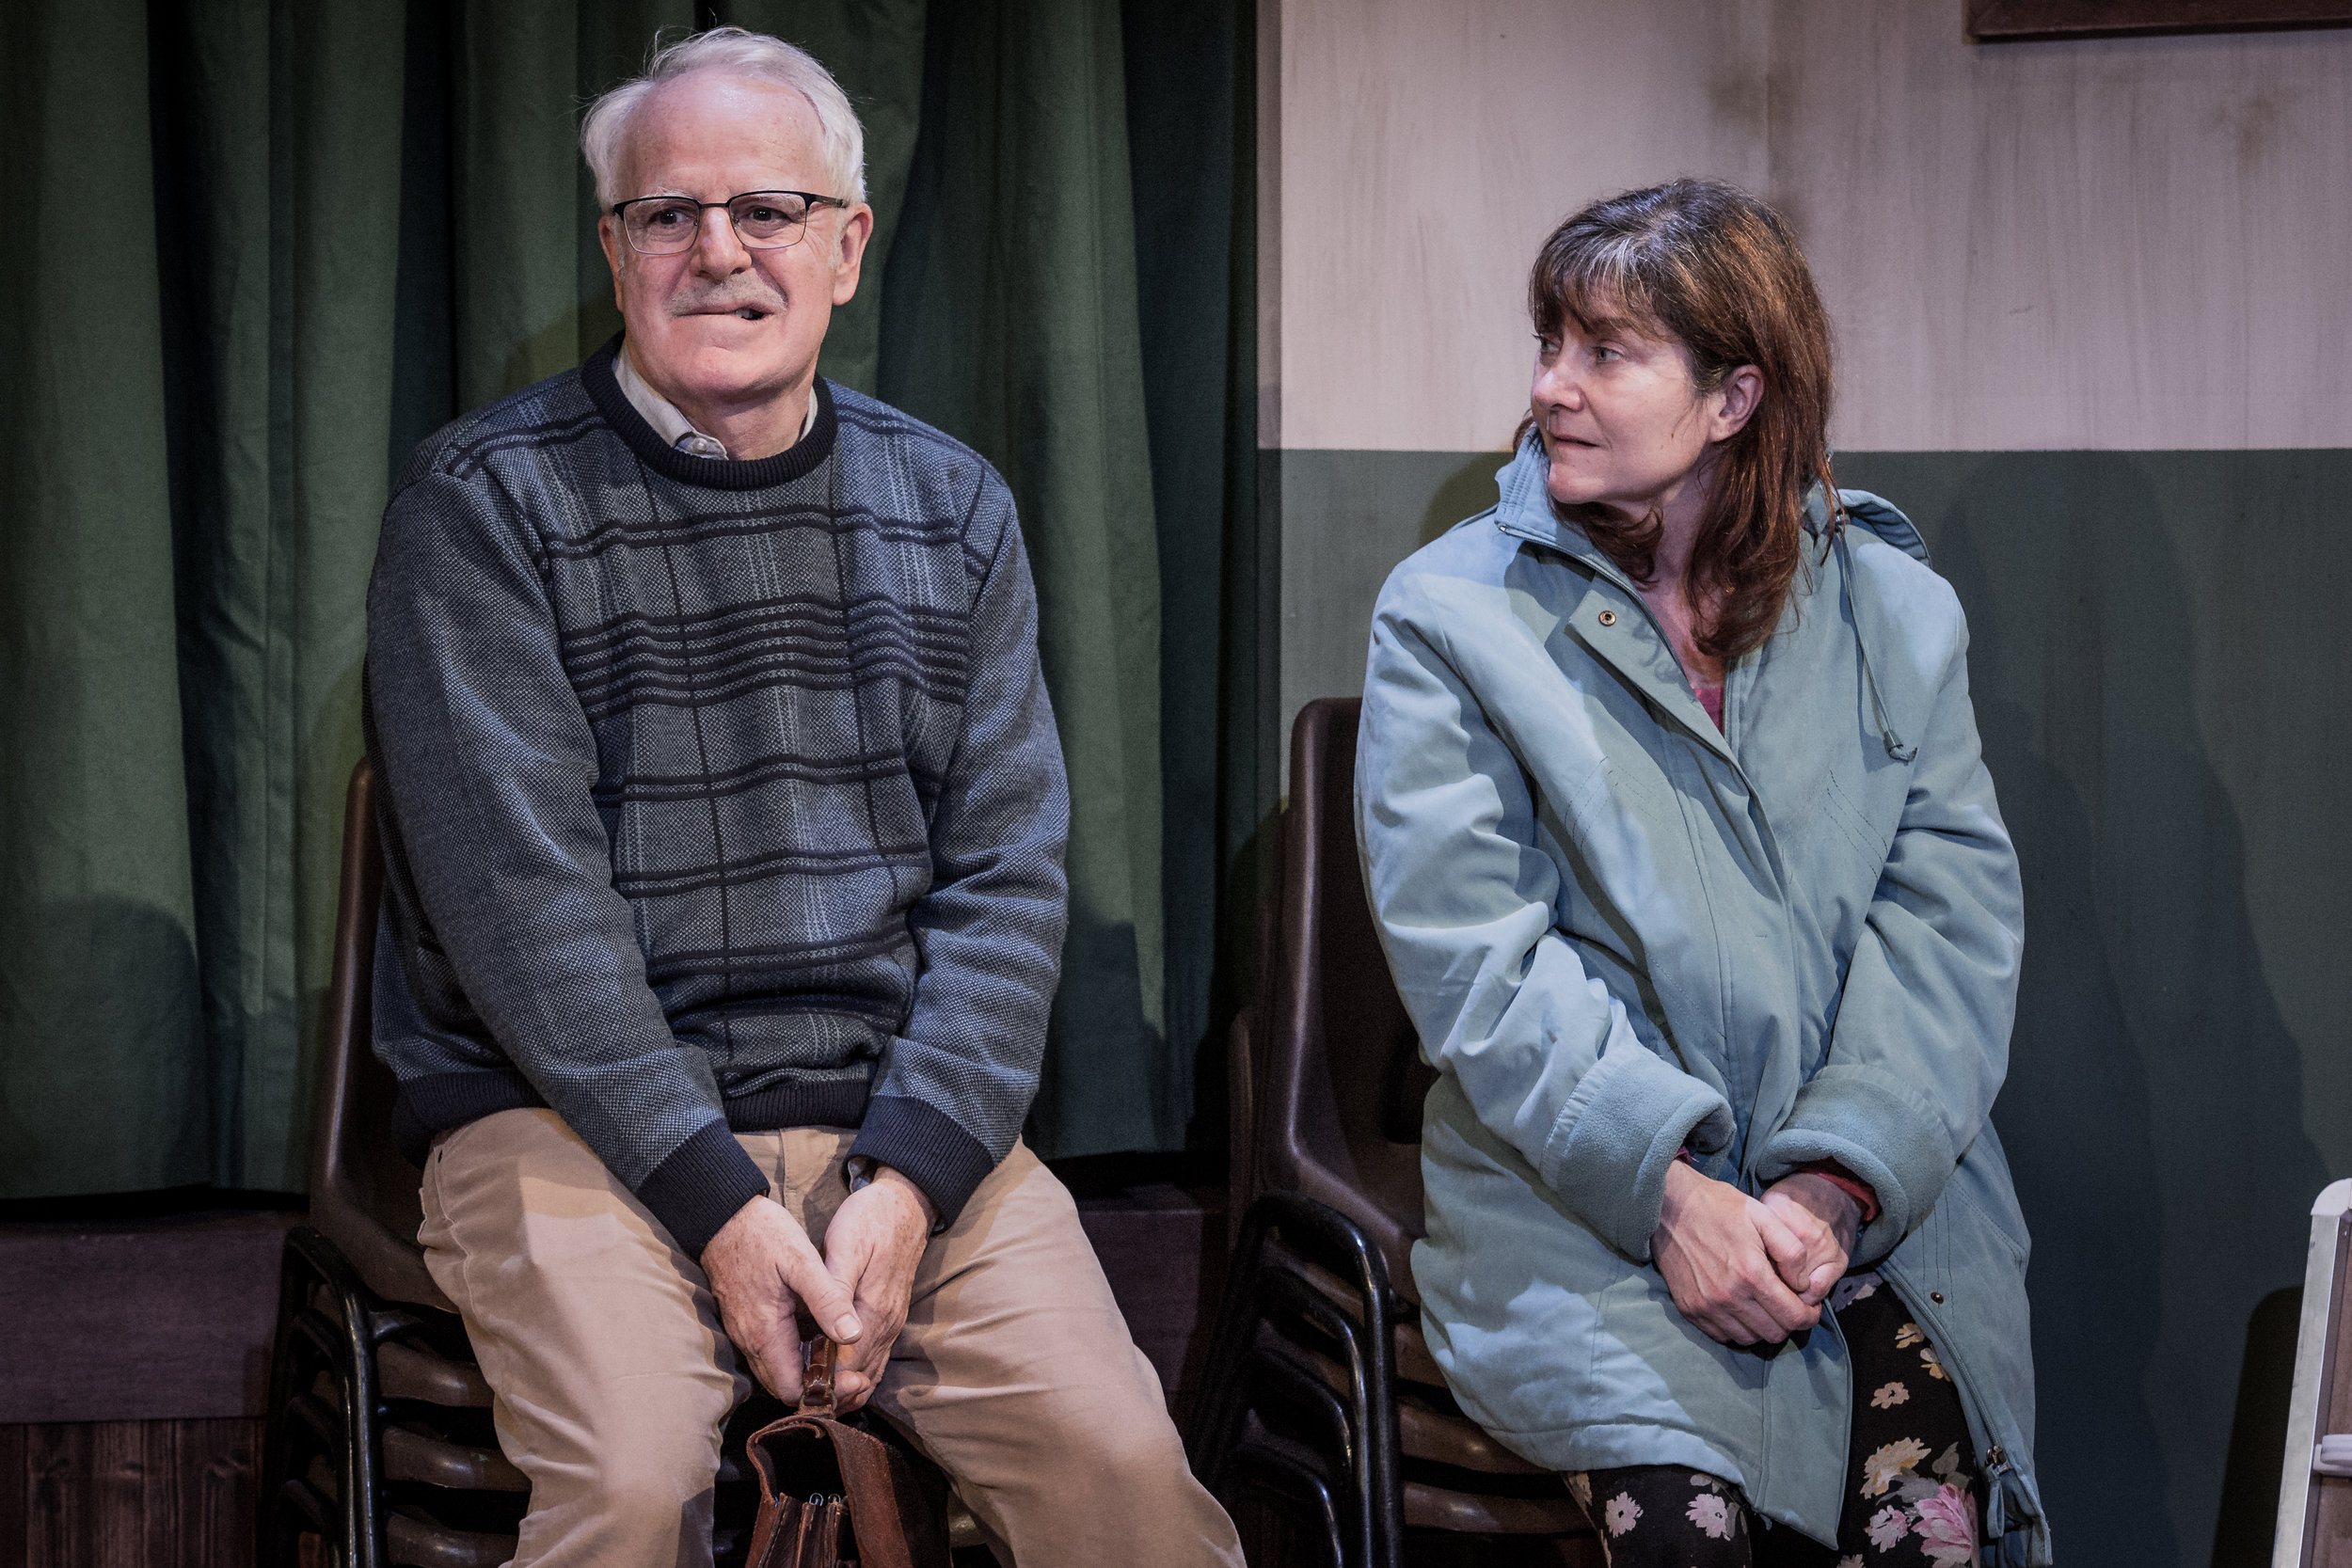  “ The performances and Cathal Cleary's confident direction sweep you through this unusual and thoughtful portrayal of middle-aged romance. ”  WhatsOnStage  